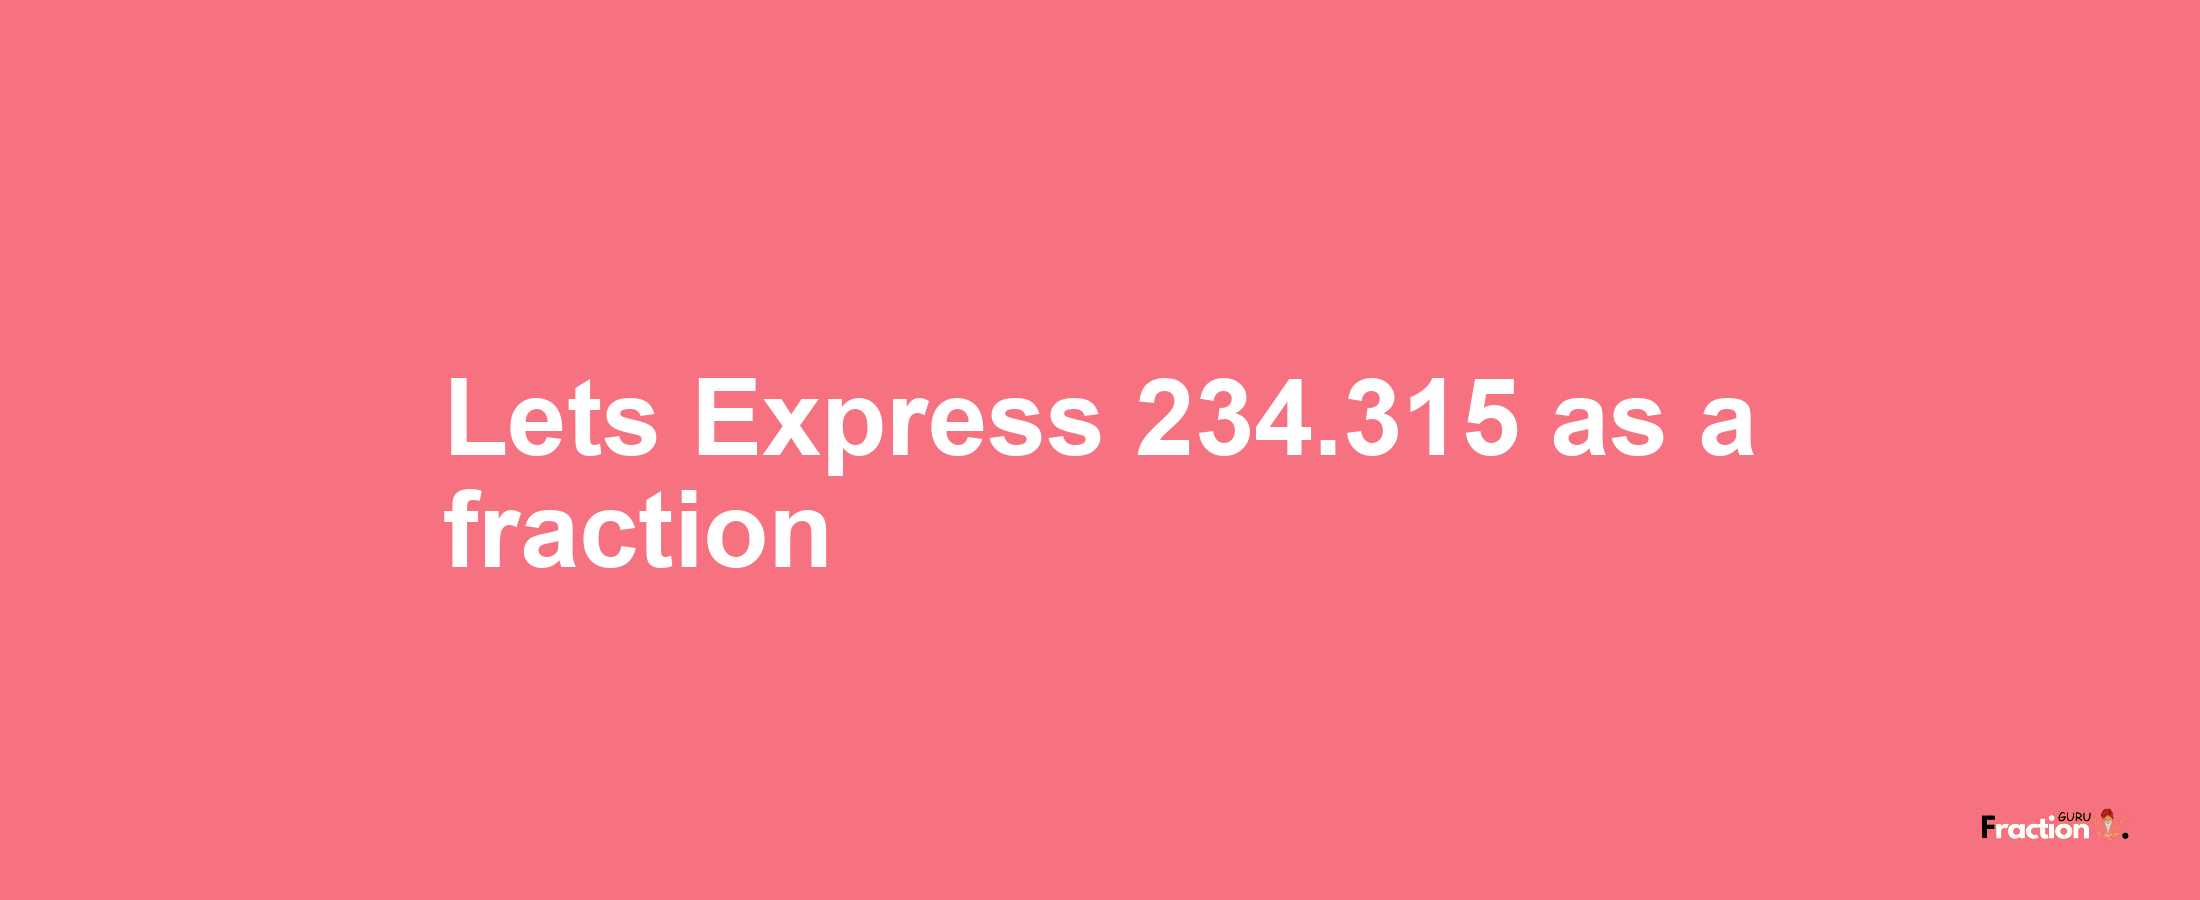 Lets Express 234.315 as afraction